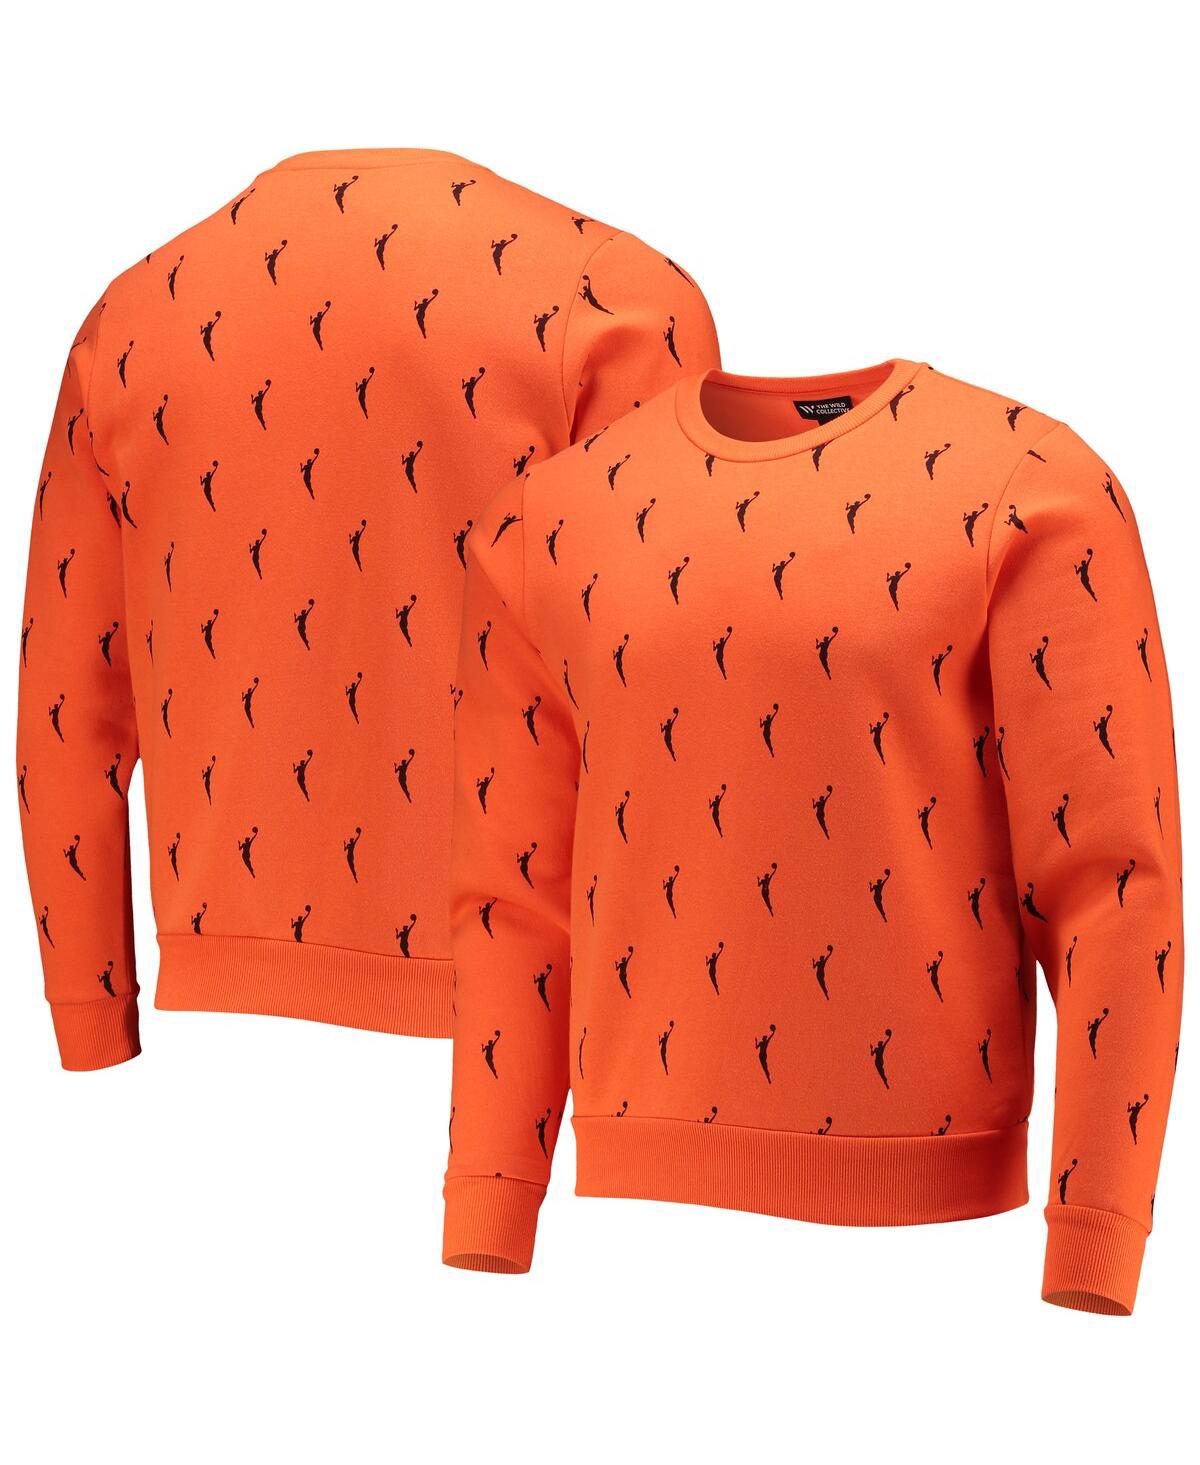 THE WILD COLLECTIVE MEN'S AND WOMEN'S ORANGE WNBA LOGOWOMAN ALL OVER LOGO PULLOVER SWEATSHIRT